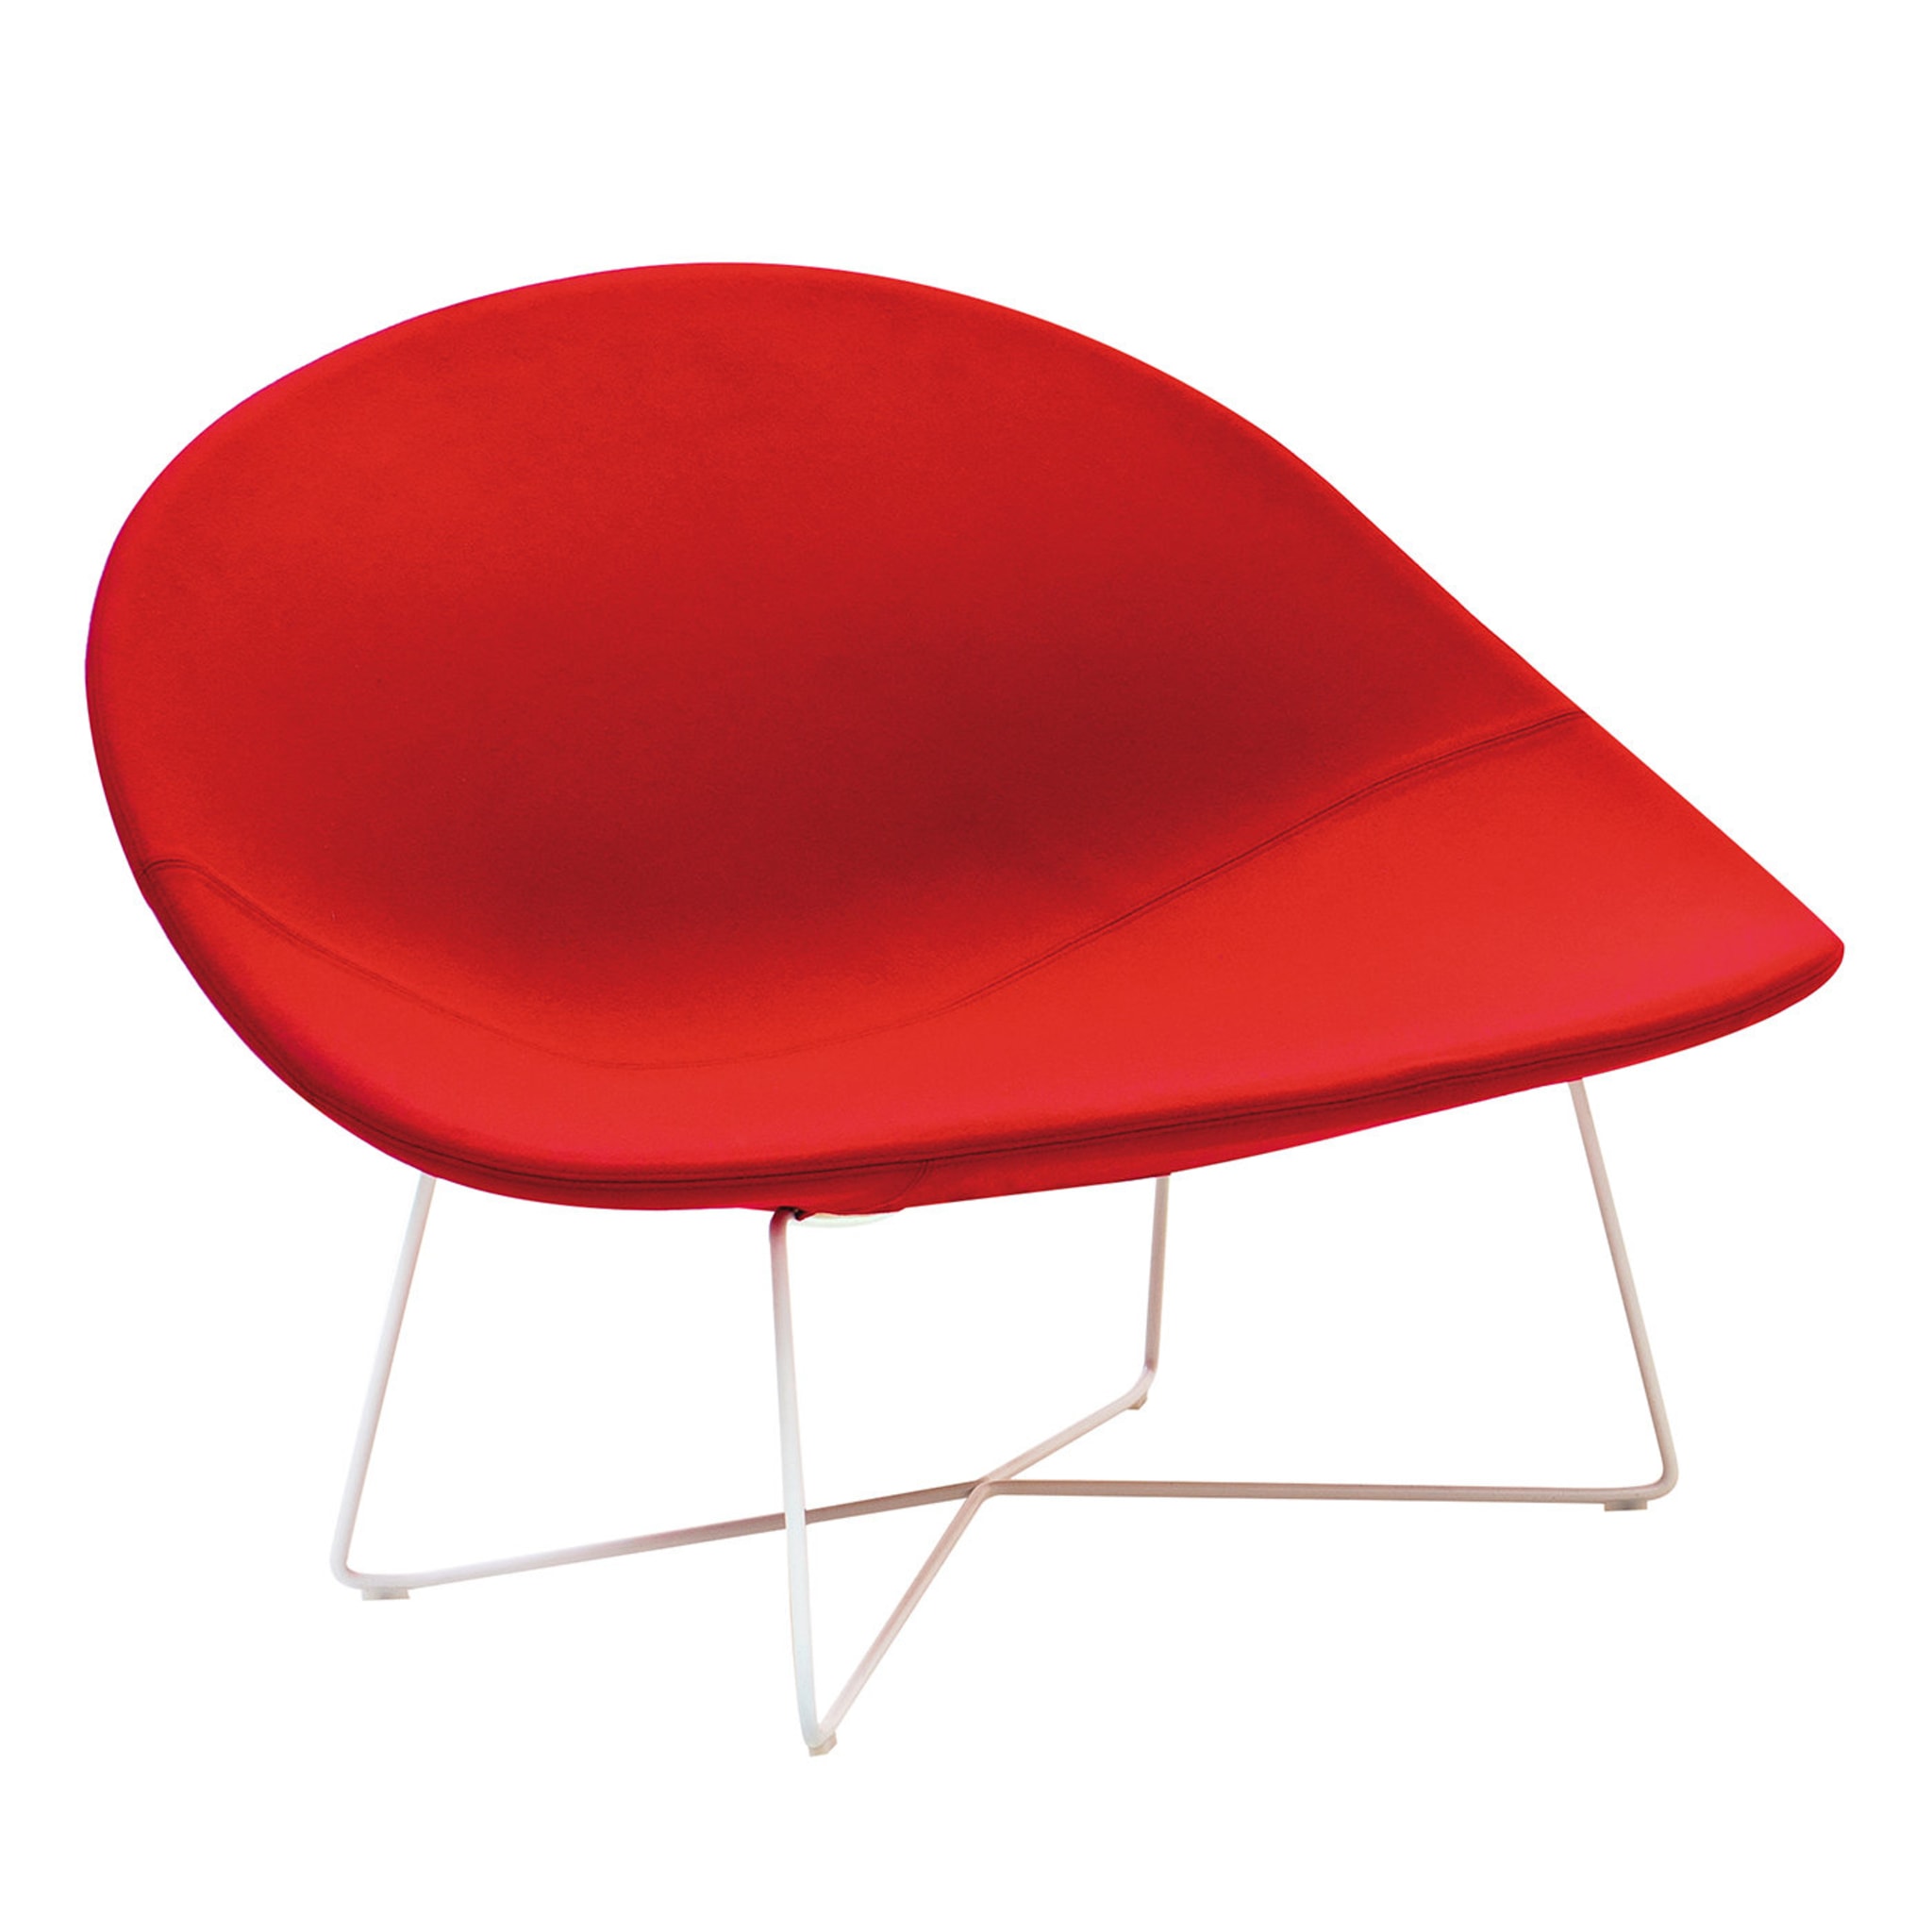 Isola Red Accent Chair by Claesson Koivisto Rune - Main view